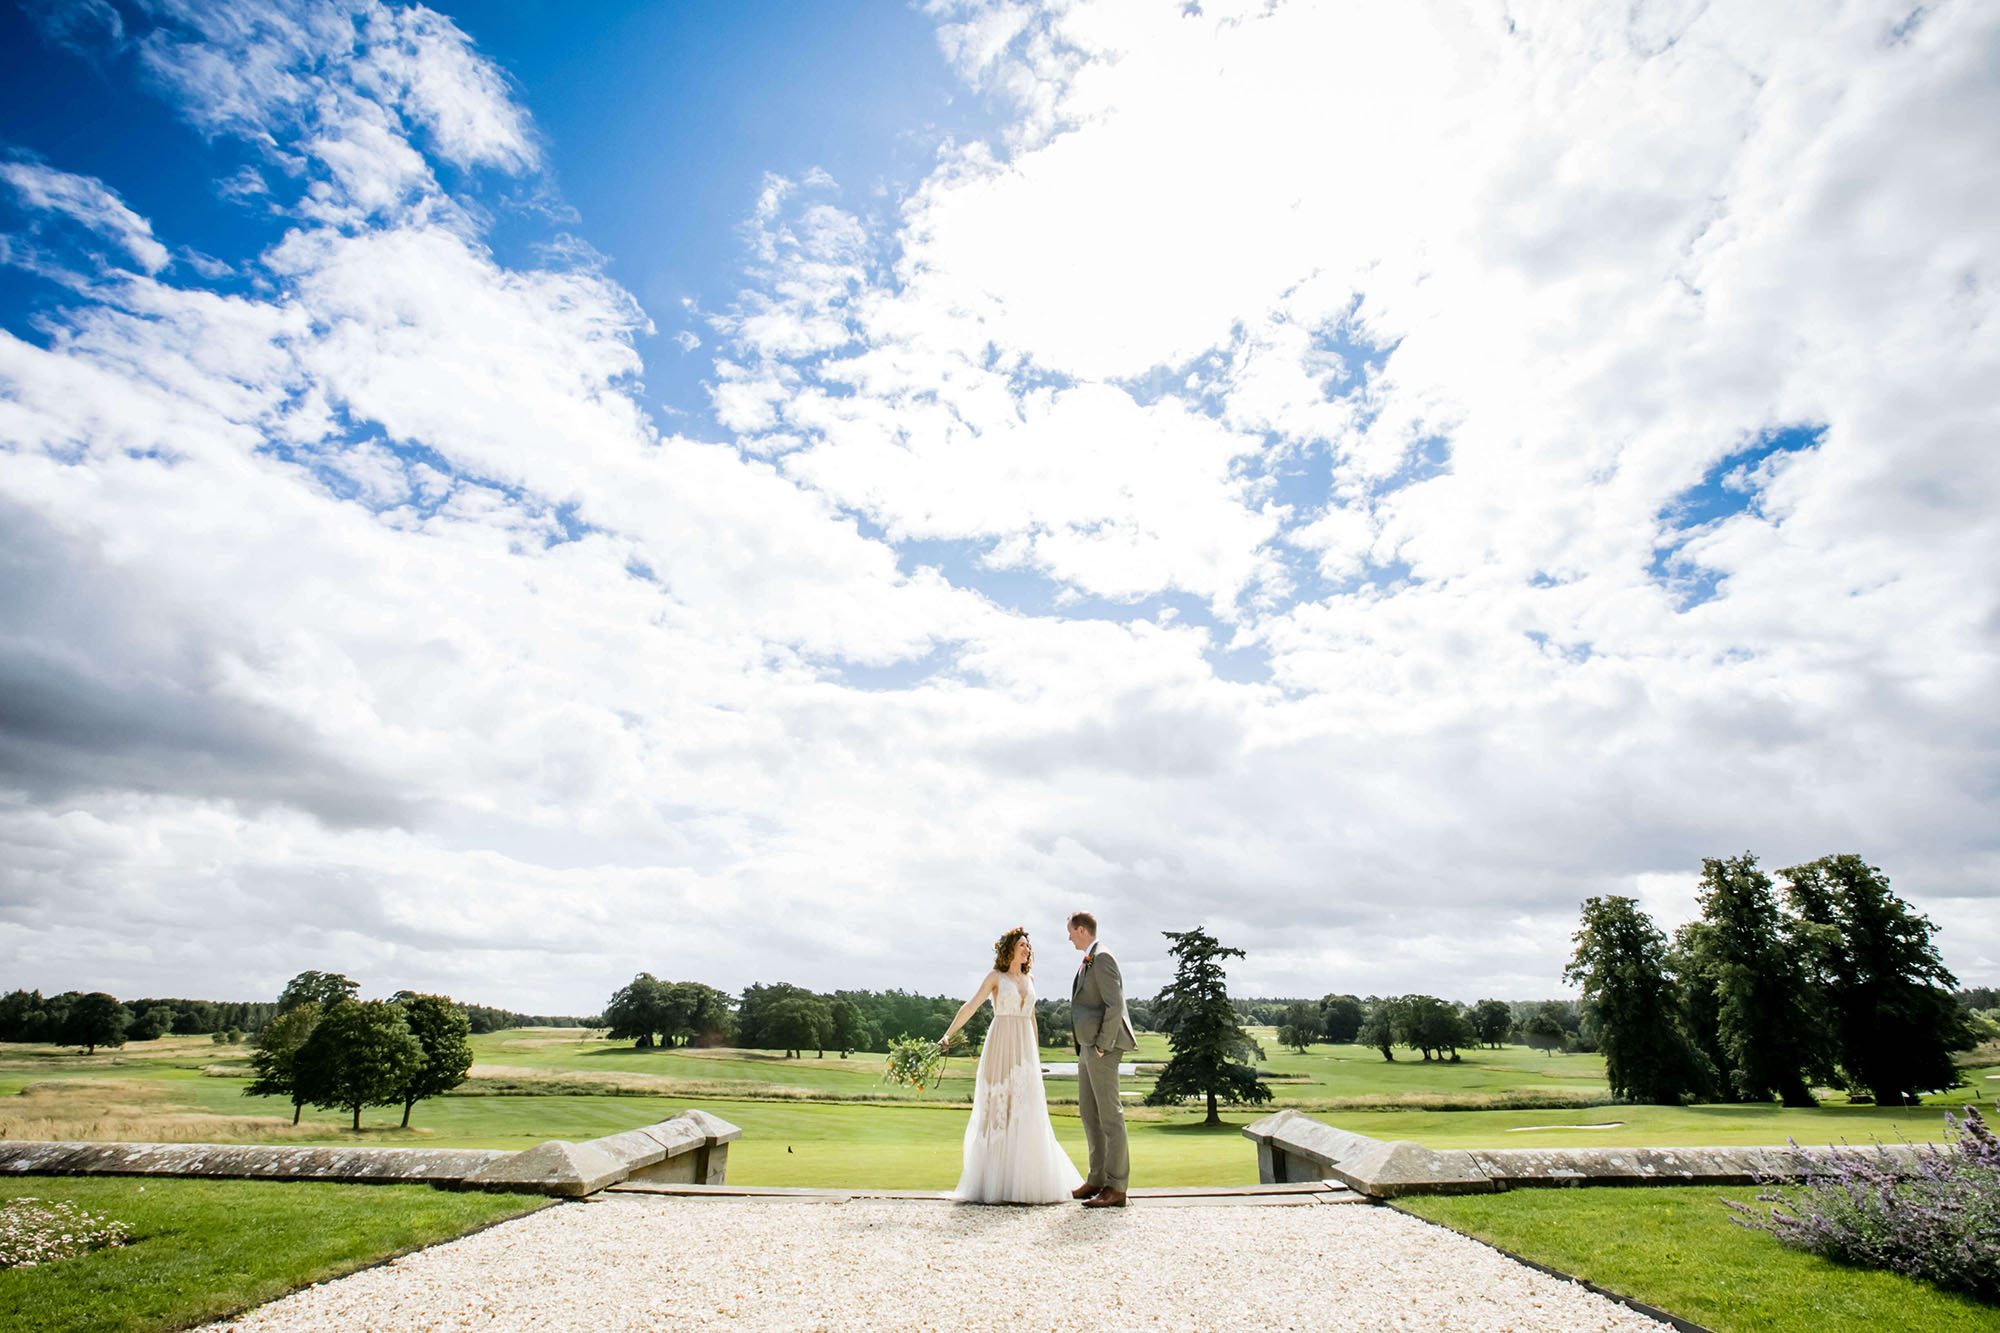 Bride and groom under a wide open blue sky with light clouds, by North East England wedding photographer Erika Tanith